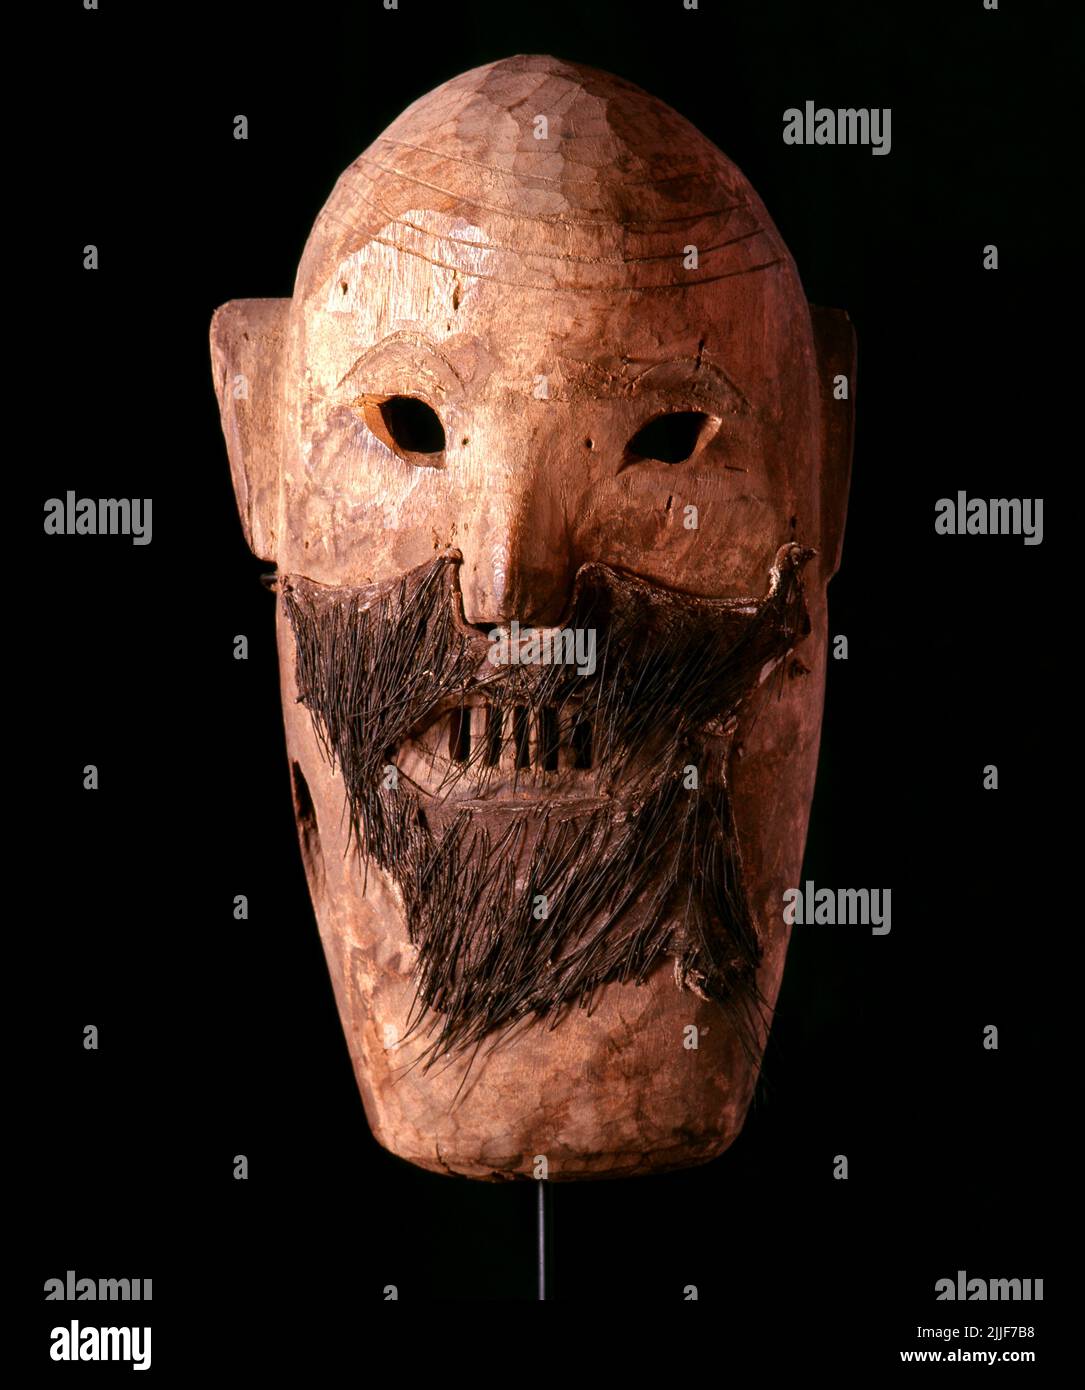 Thailand / China: Yao shaman's mask from northern Thailand. The Yao nationality (its great majority branch is also known as Mien) is a government classification for various minorities in China. They form one of the 55 ethnic minority groups officially recognized by the People's Republic of China, where they reside in the mountainous terrain of the southwest and south. They also form one of the 54 ethnic groups officially recognized by Vietnam. In the last census, they numbered 2,637,421 in China, and roughly 470,000 in Vietnam. In Thailand they number 40,000 and in Laos 20,000. Stock Photo